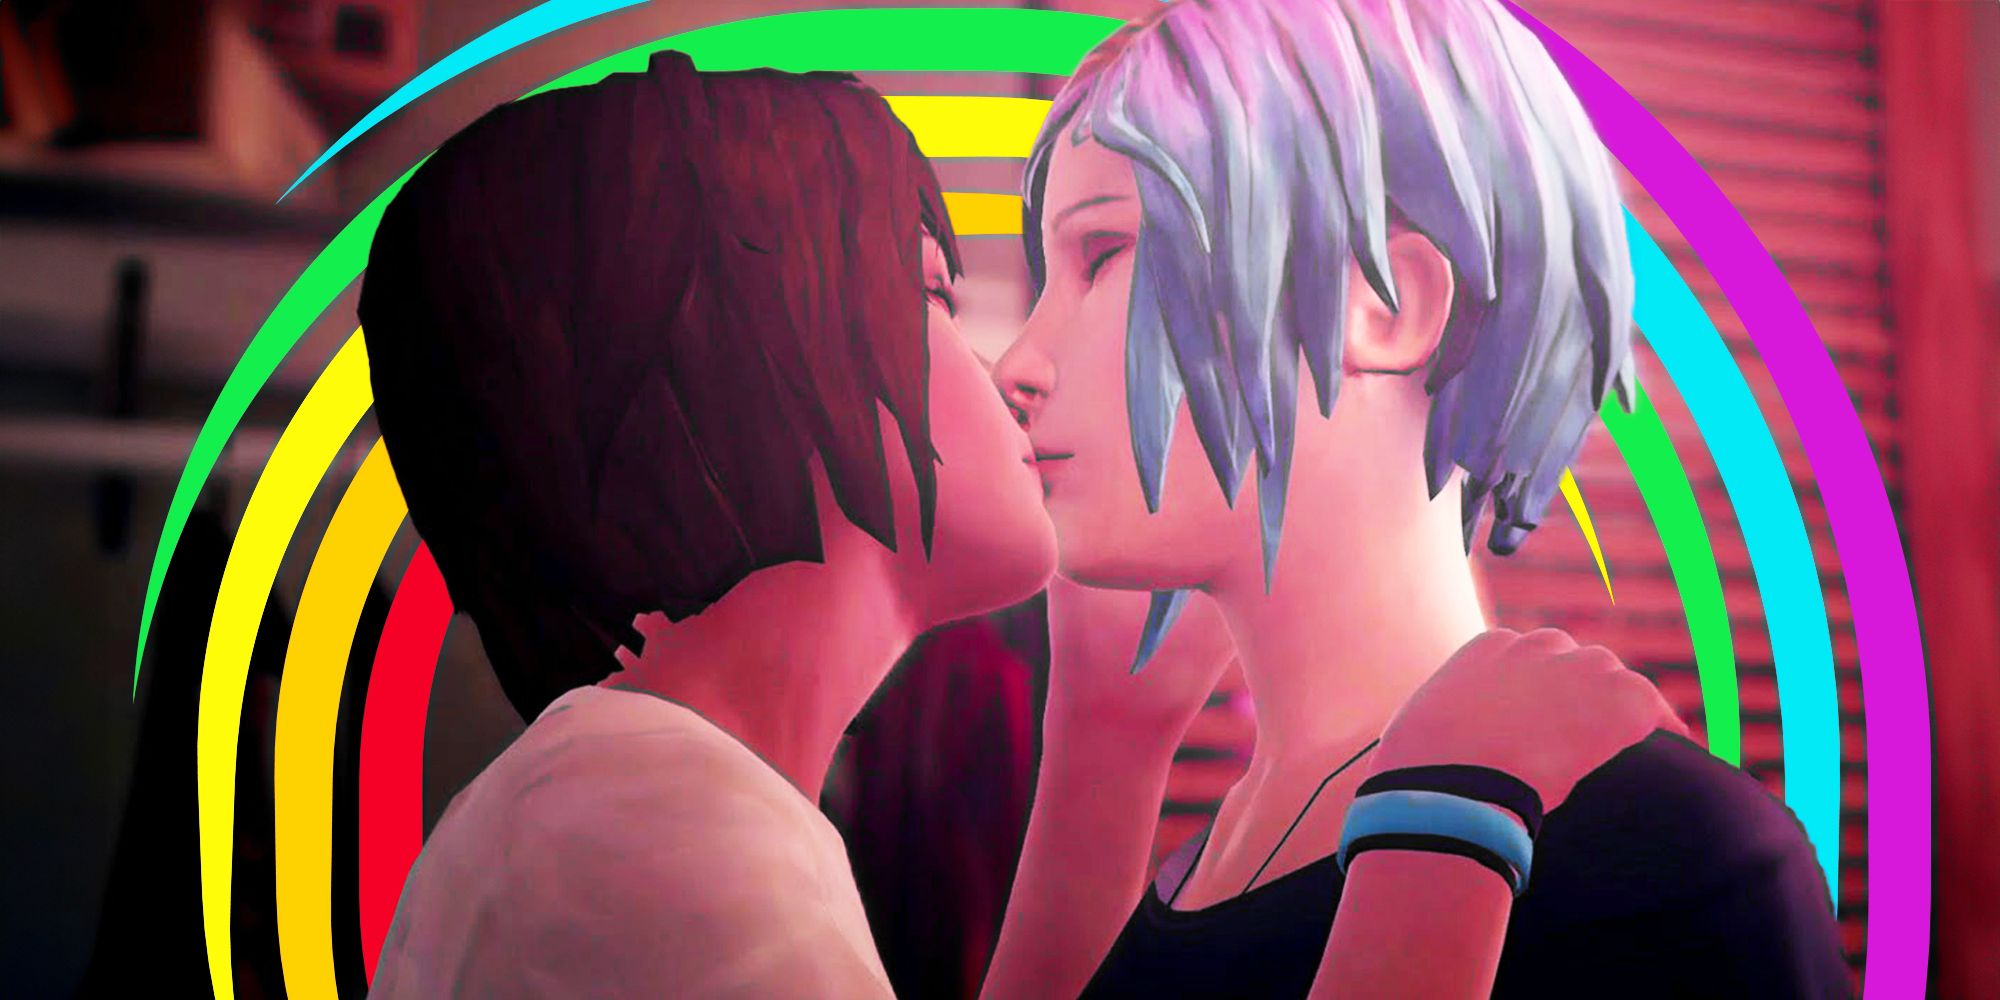 Queer romance in video games